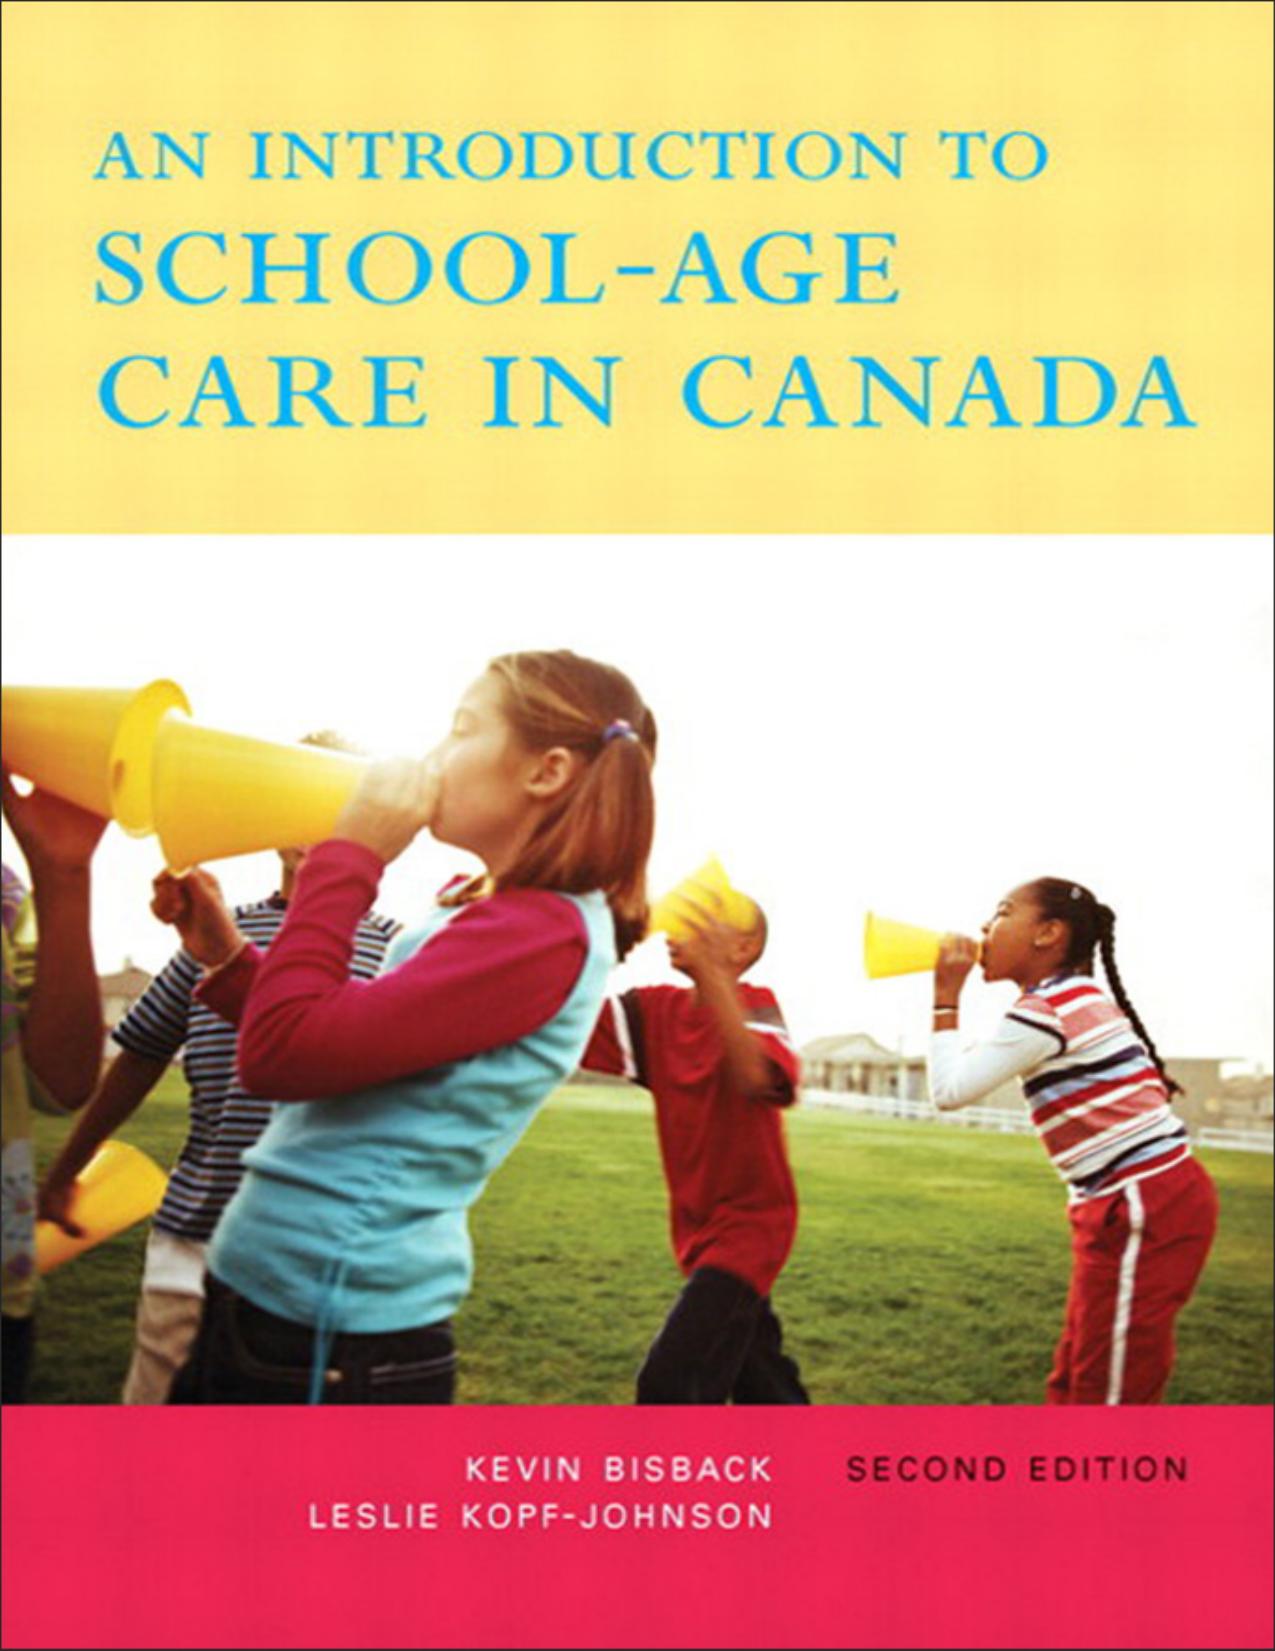 (eBook PDF)An Introduction to School-Age Care in Canada 2nd Edition by Kevin Bisback,Leslie Kopf-Johnson